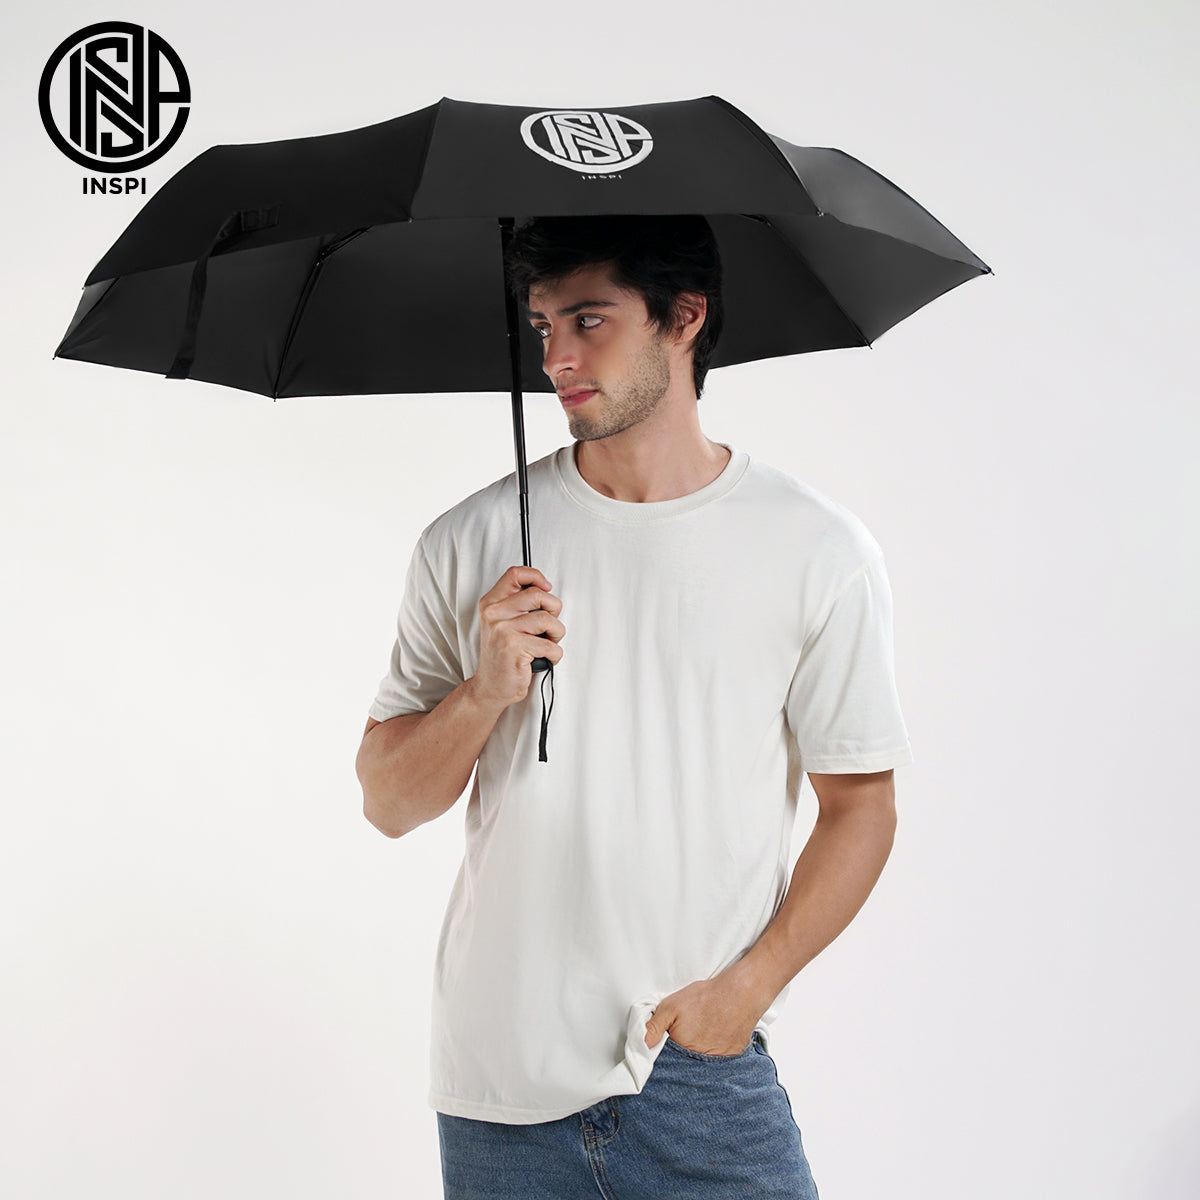 INSPI Umbrella Folding Automatic w/ Sun Protection Waterproof Wind Resistant Premium Quality Payong